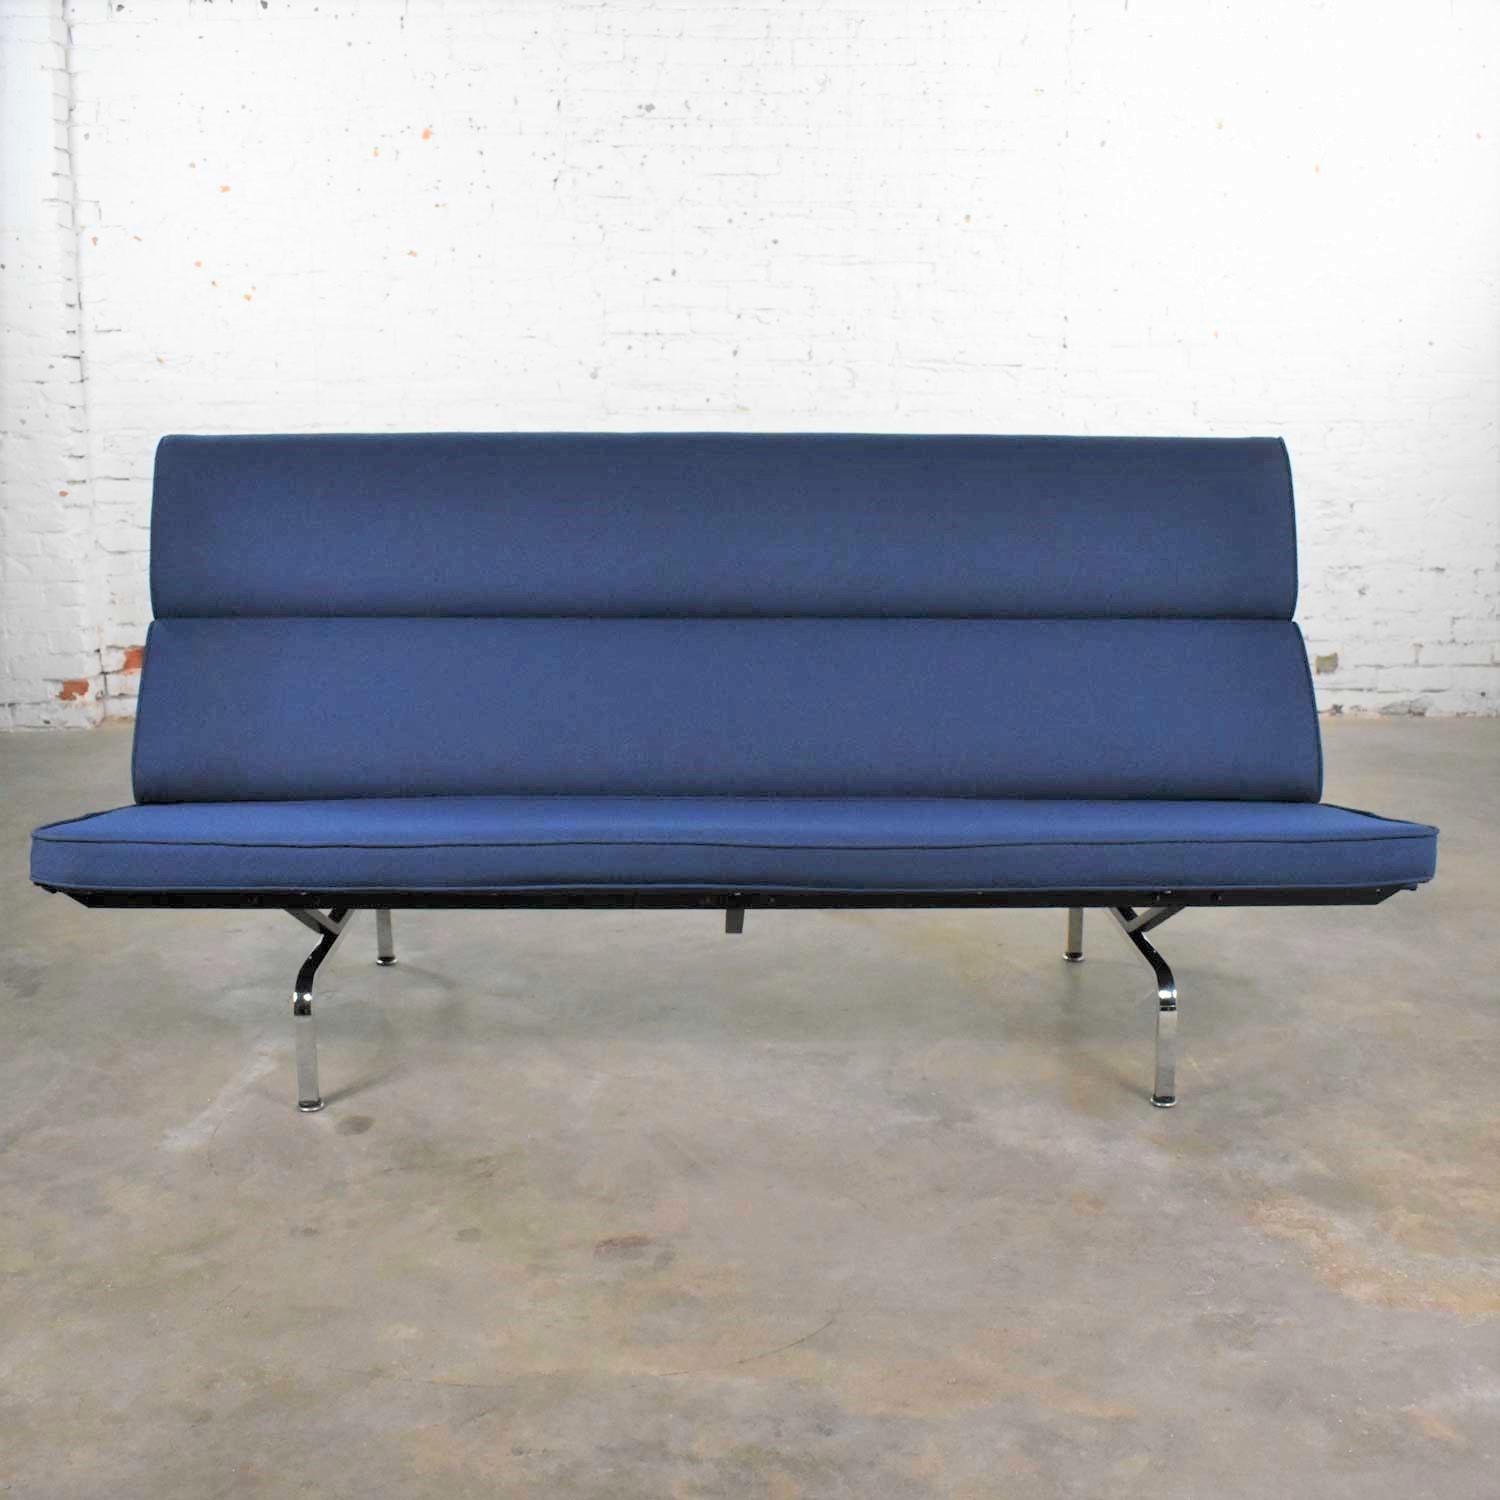 American Vintage Mid-Century Modern Eames Sofa Compact in Blue by Herman Miller